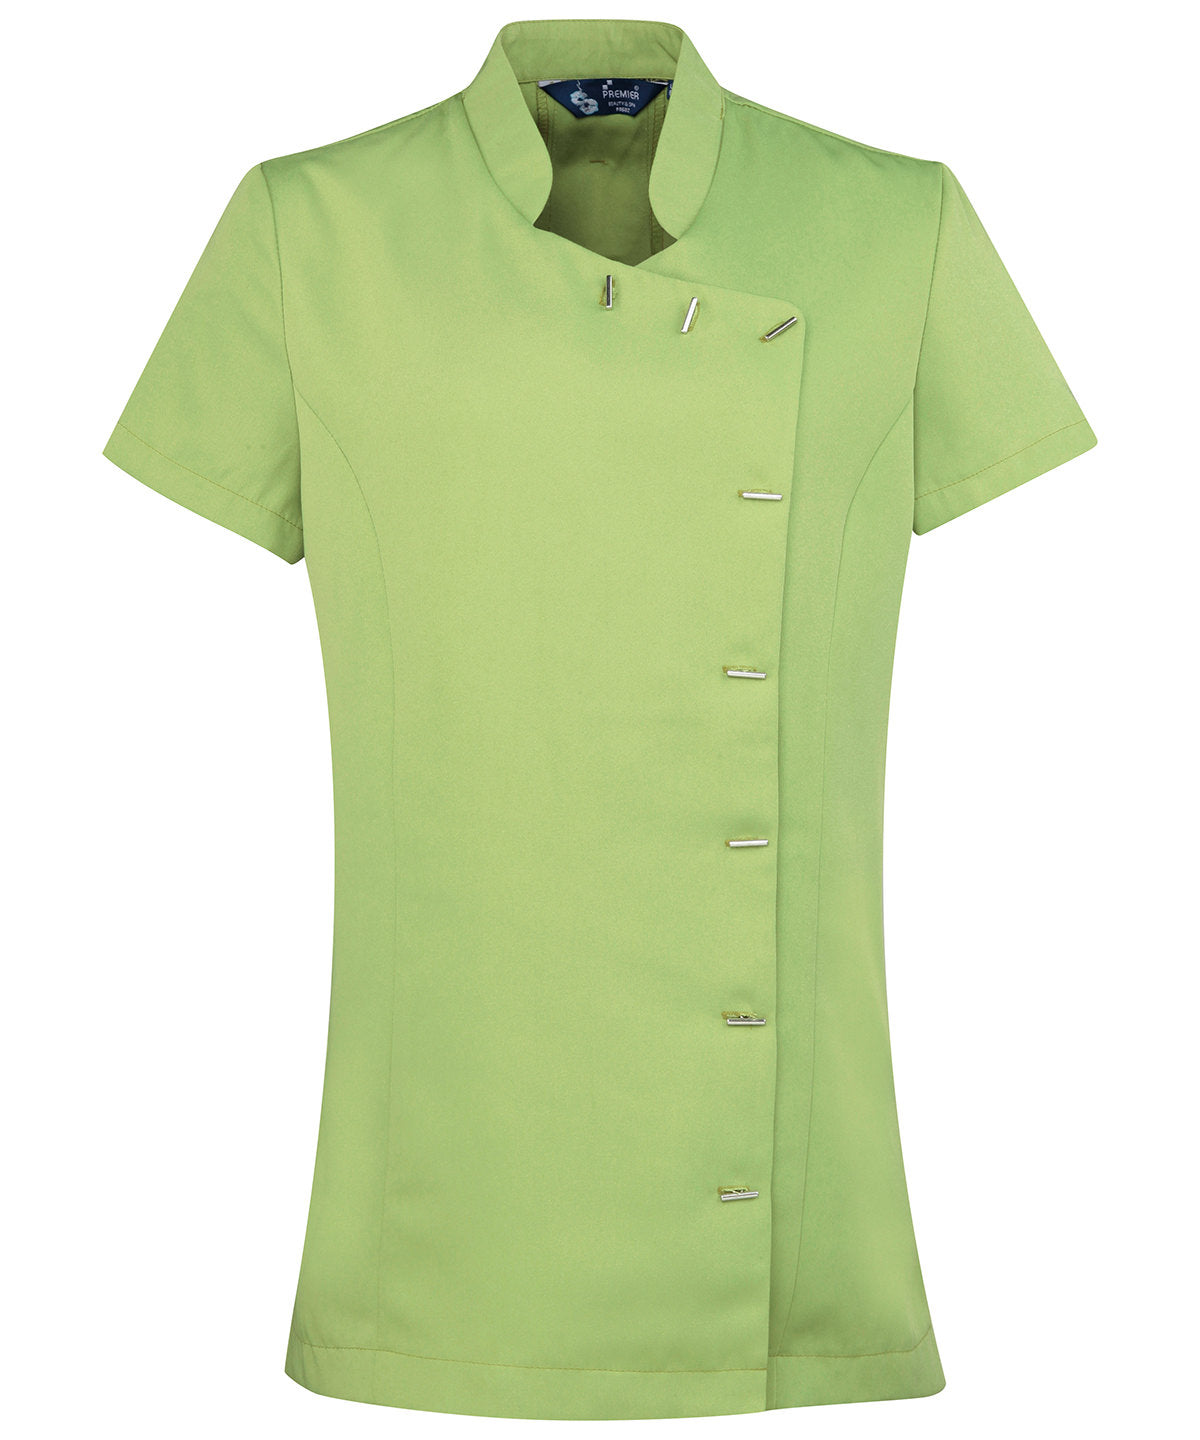 Premier Orchid beauty and spa tunic Lime